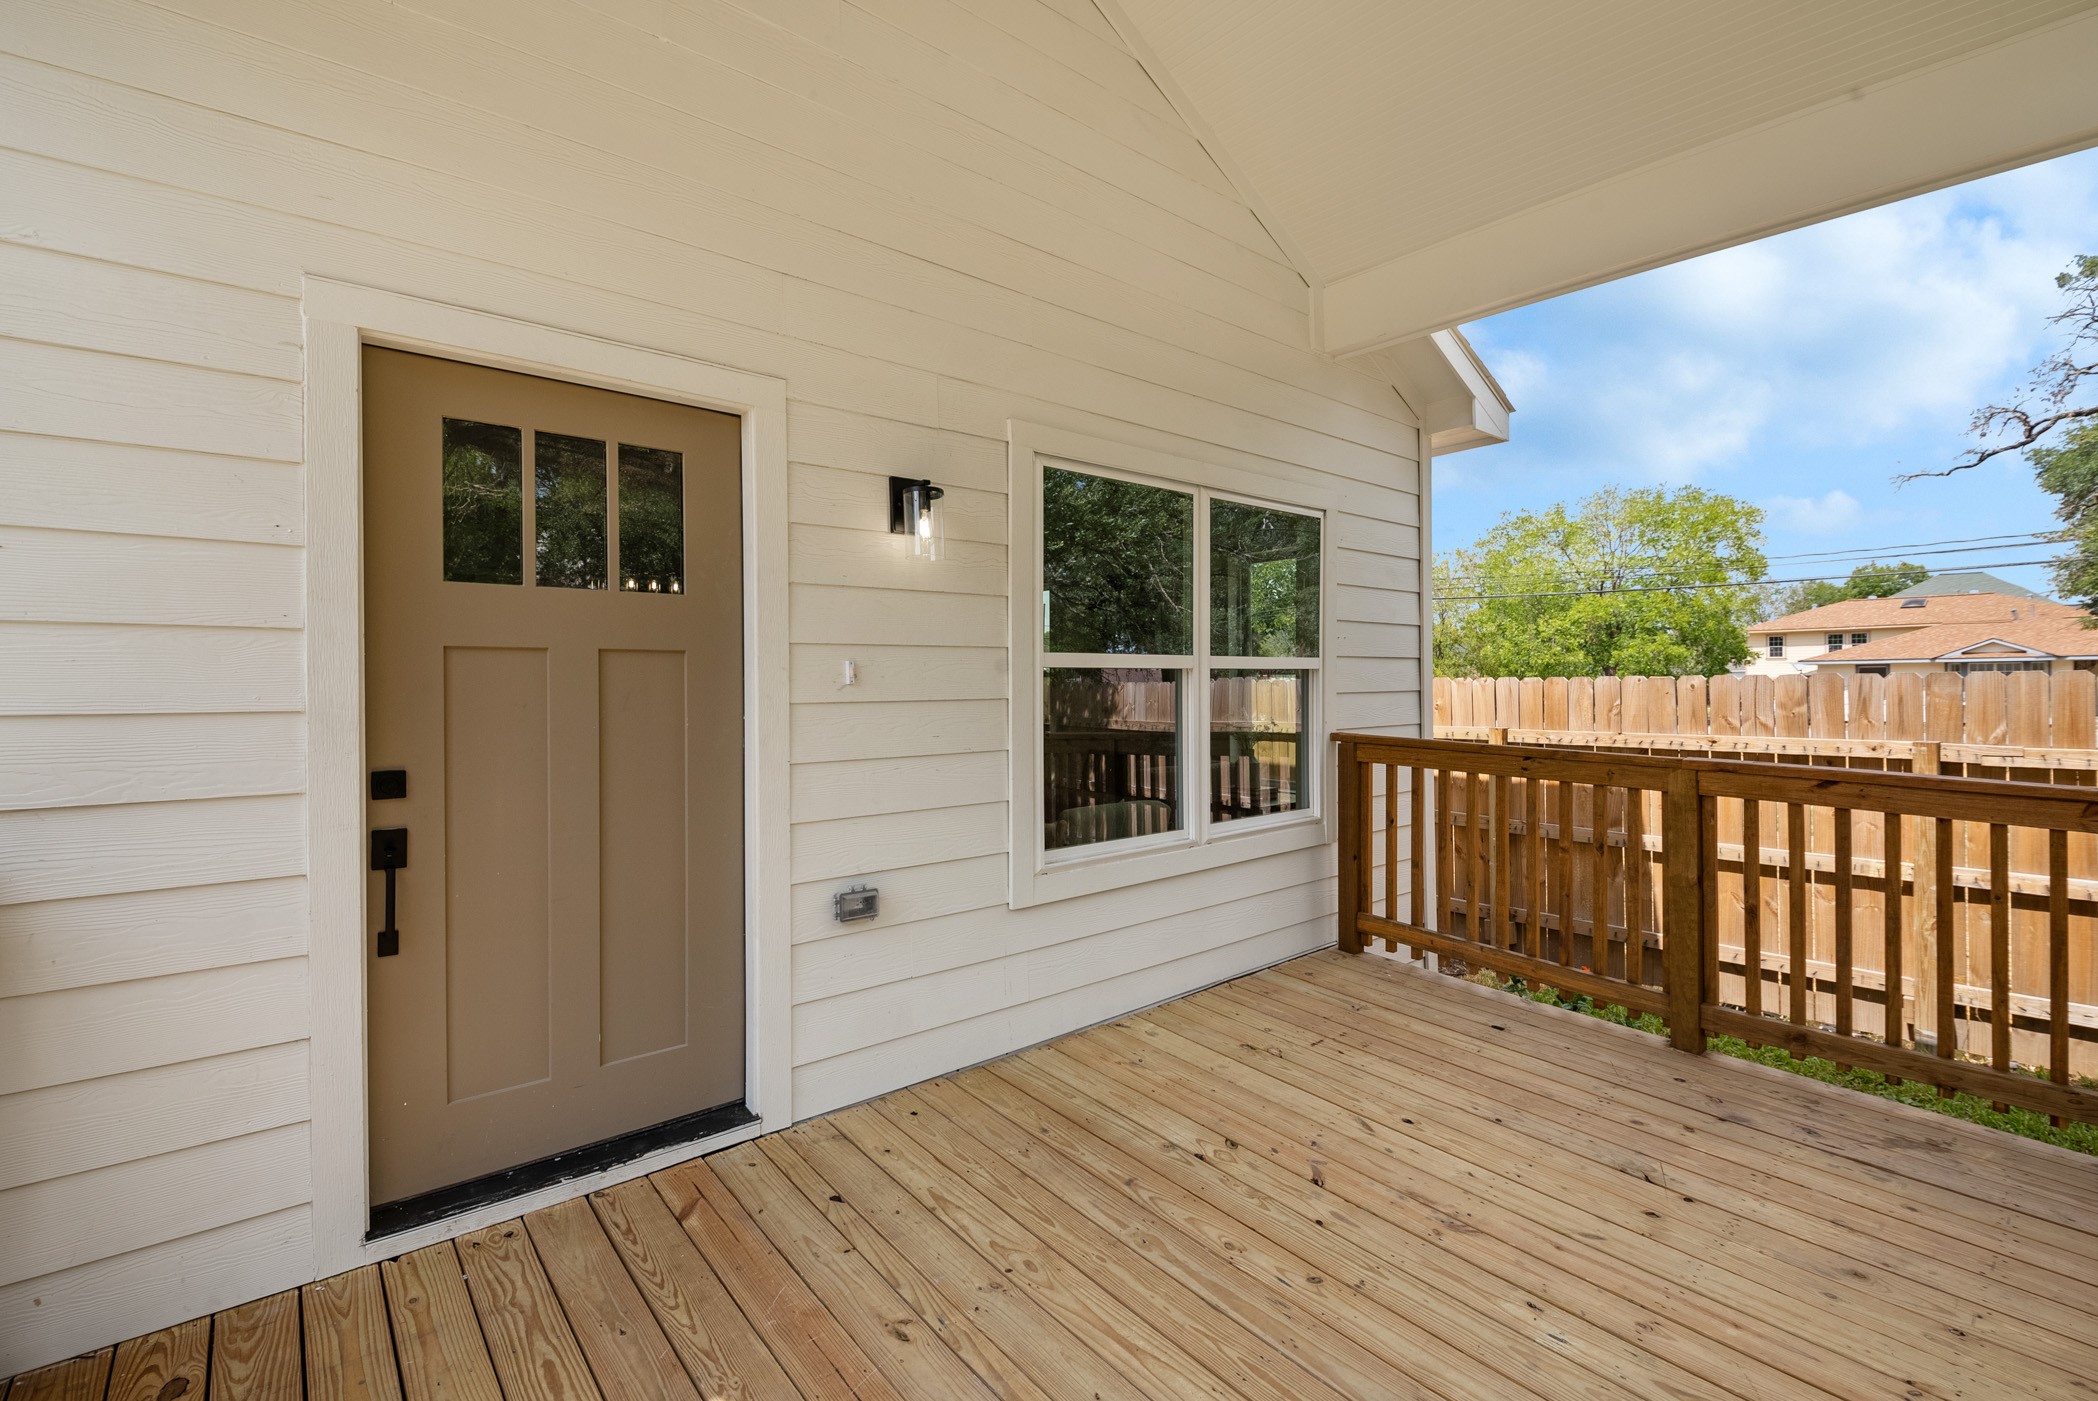 Imagine all of the decorating you can do for the upcoming holidays on this front porch!